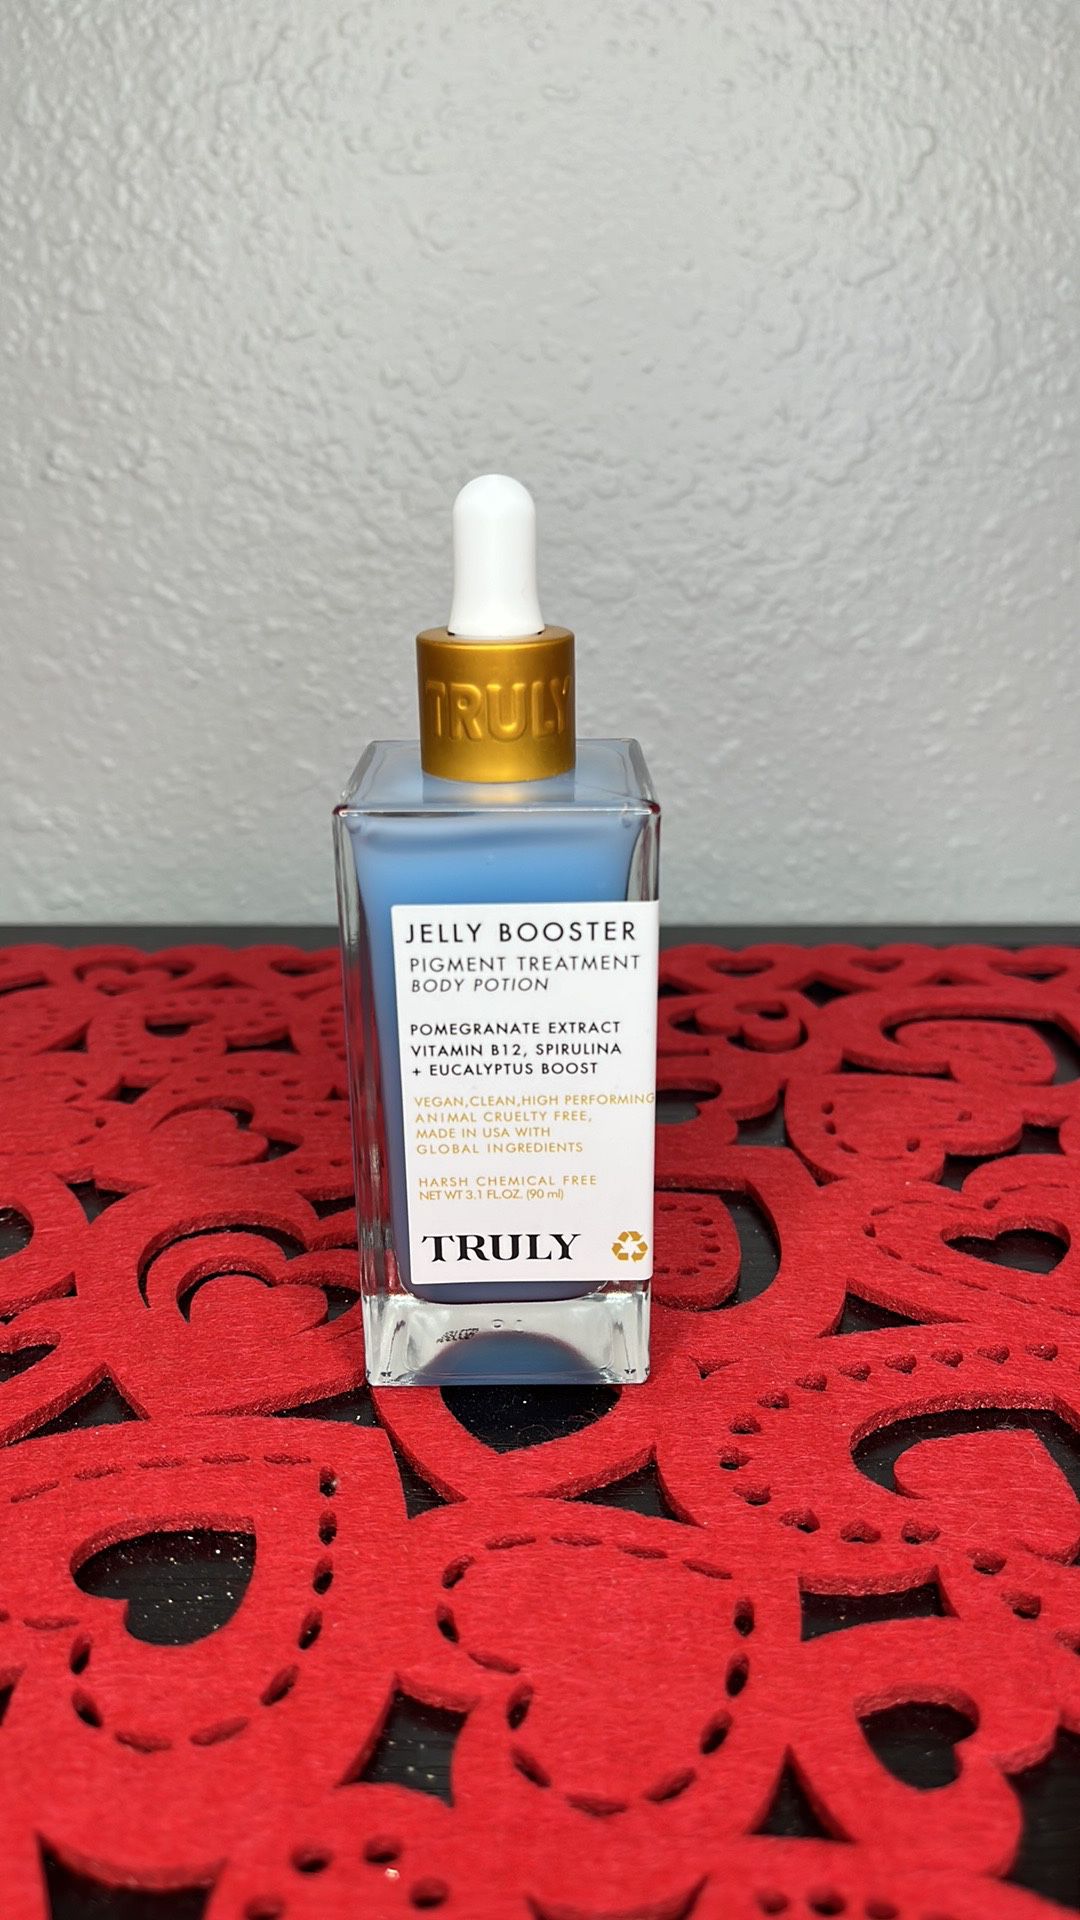 TRULY Jelly Booster Pigment Treatment